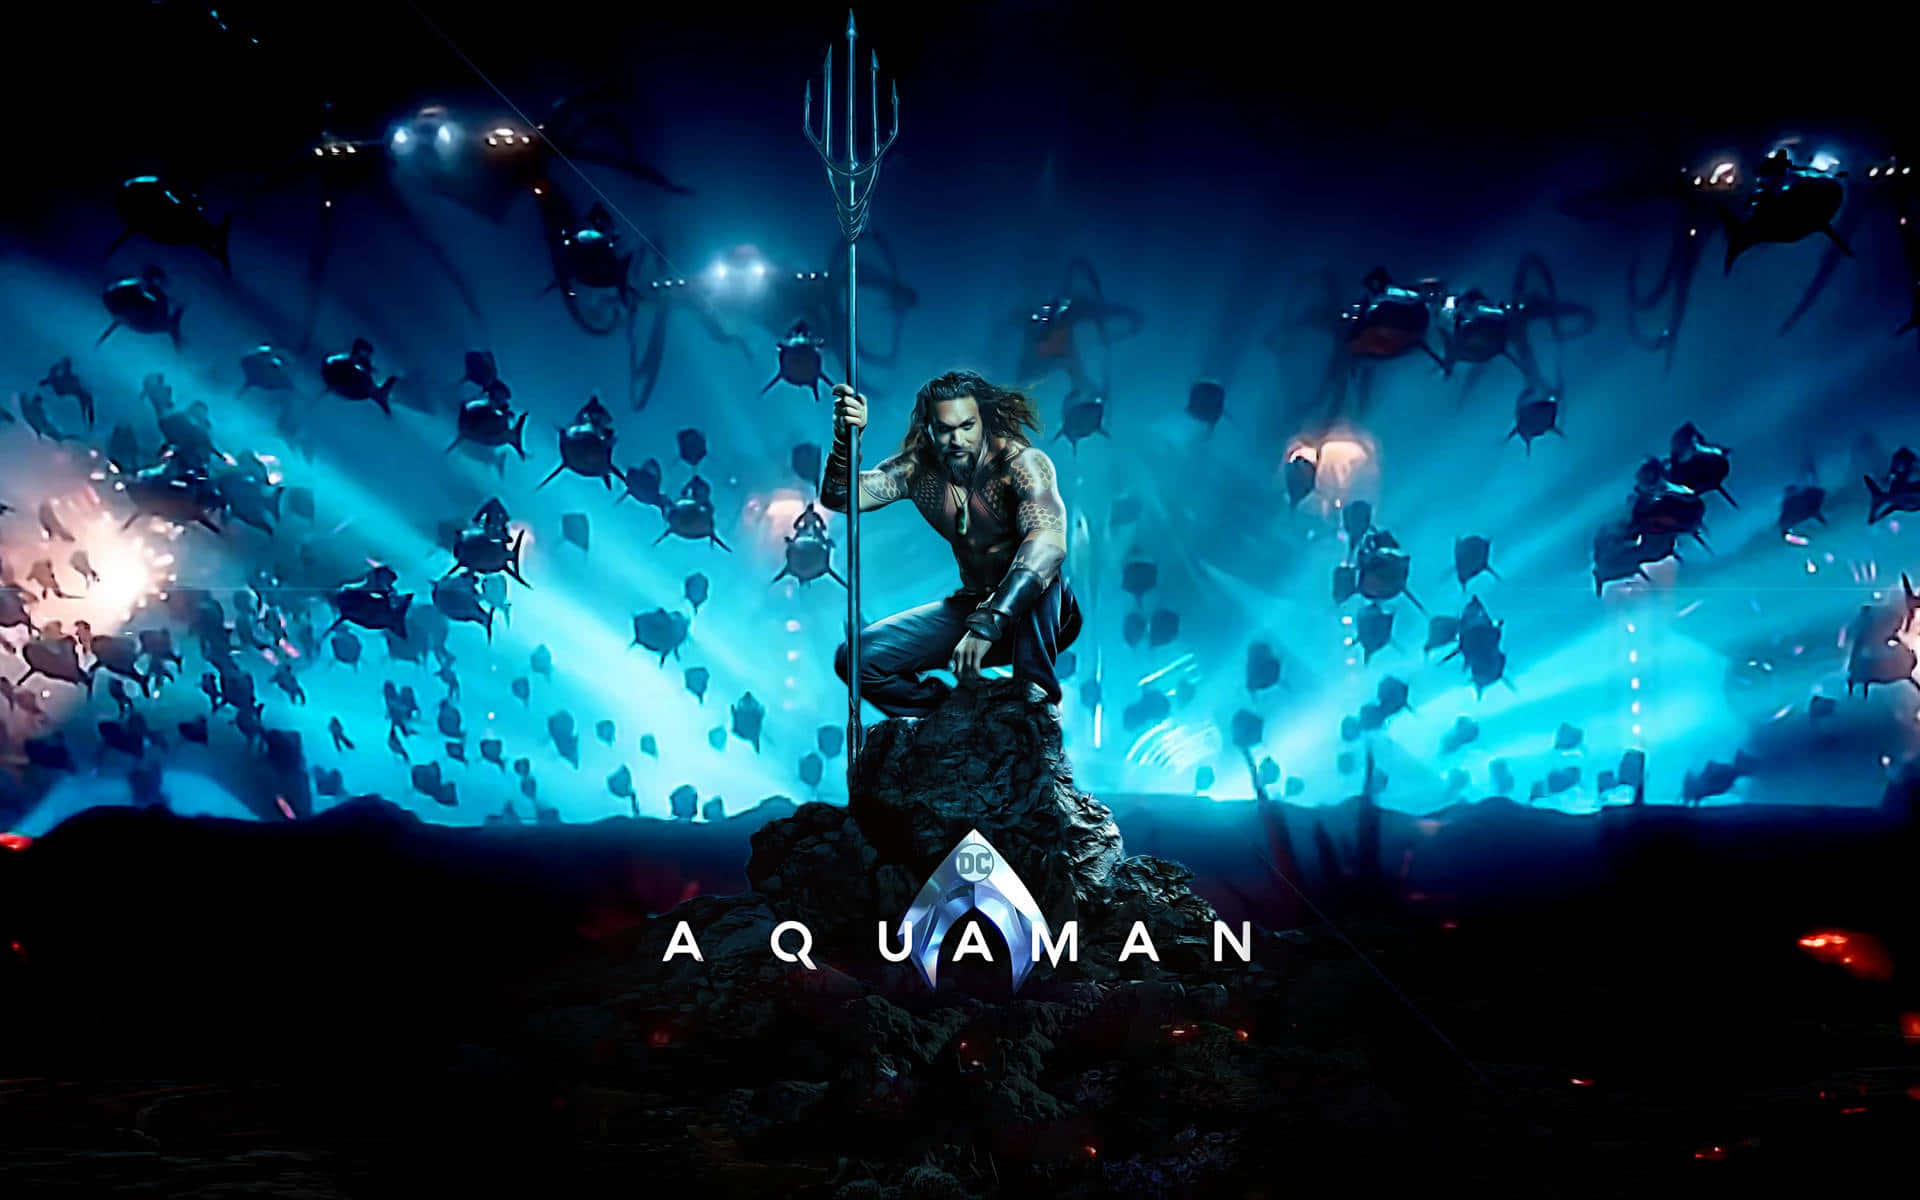 "Dive into an underwater adventure with Aquaman!”